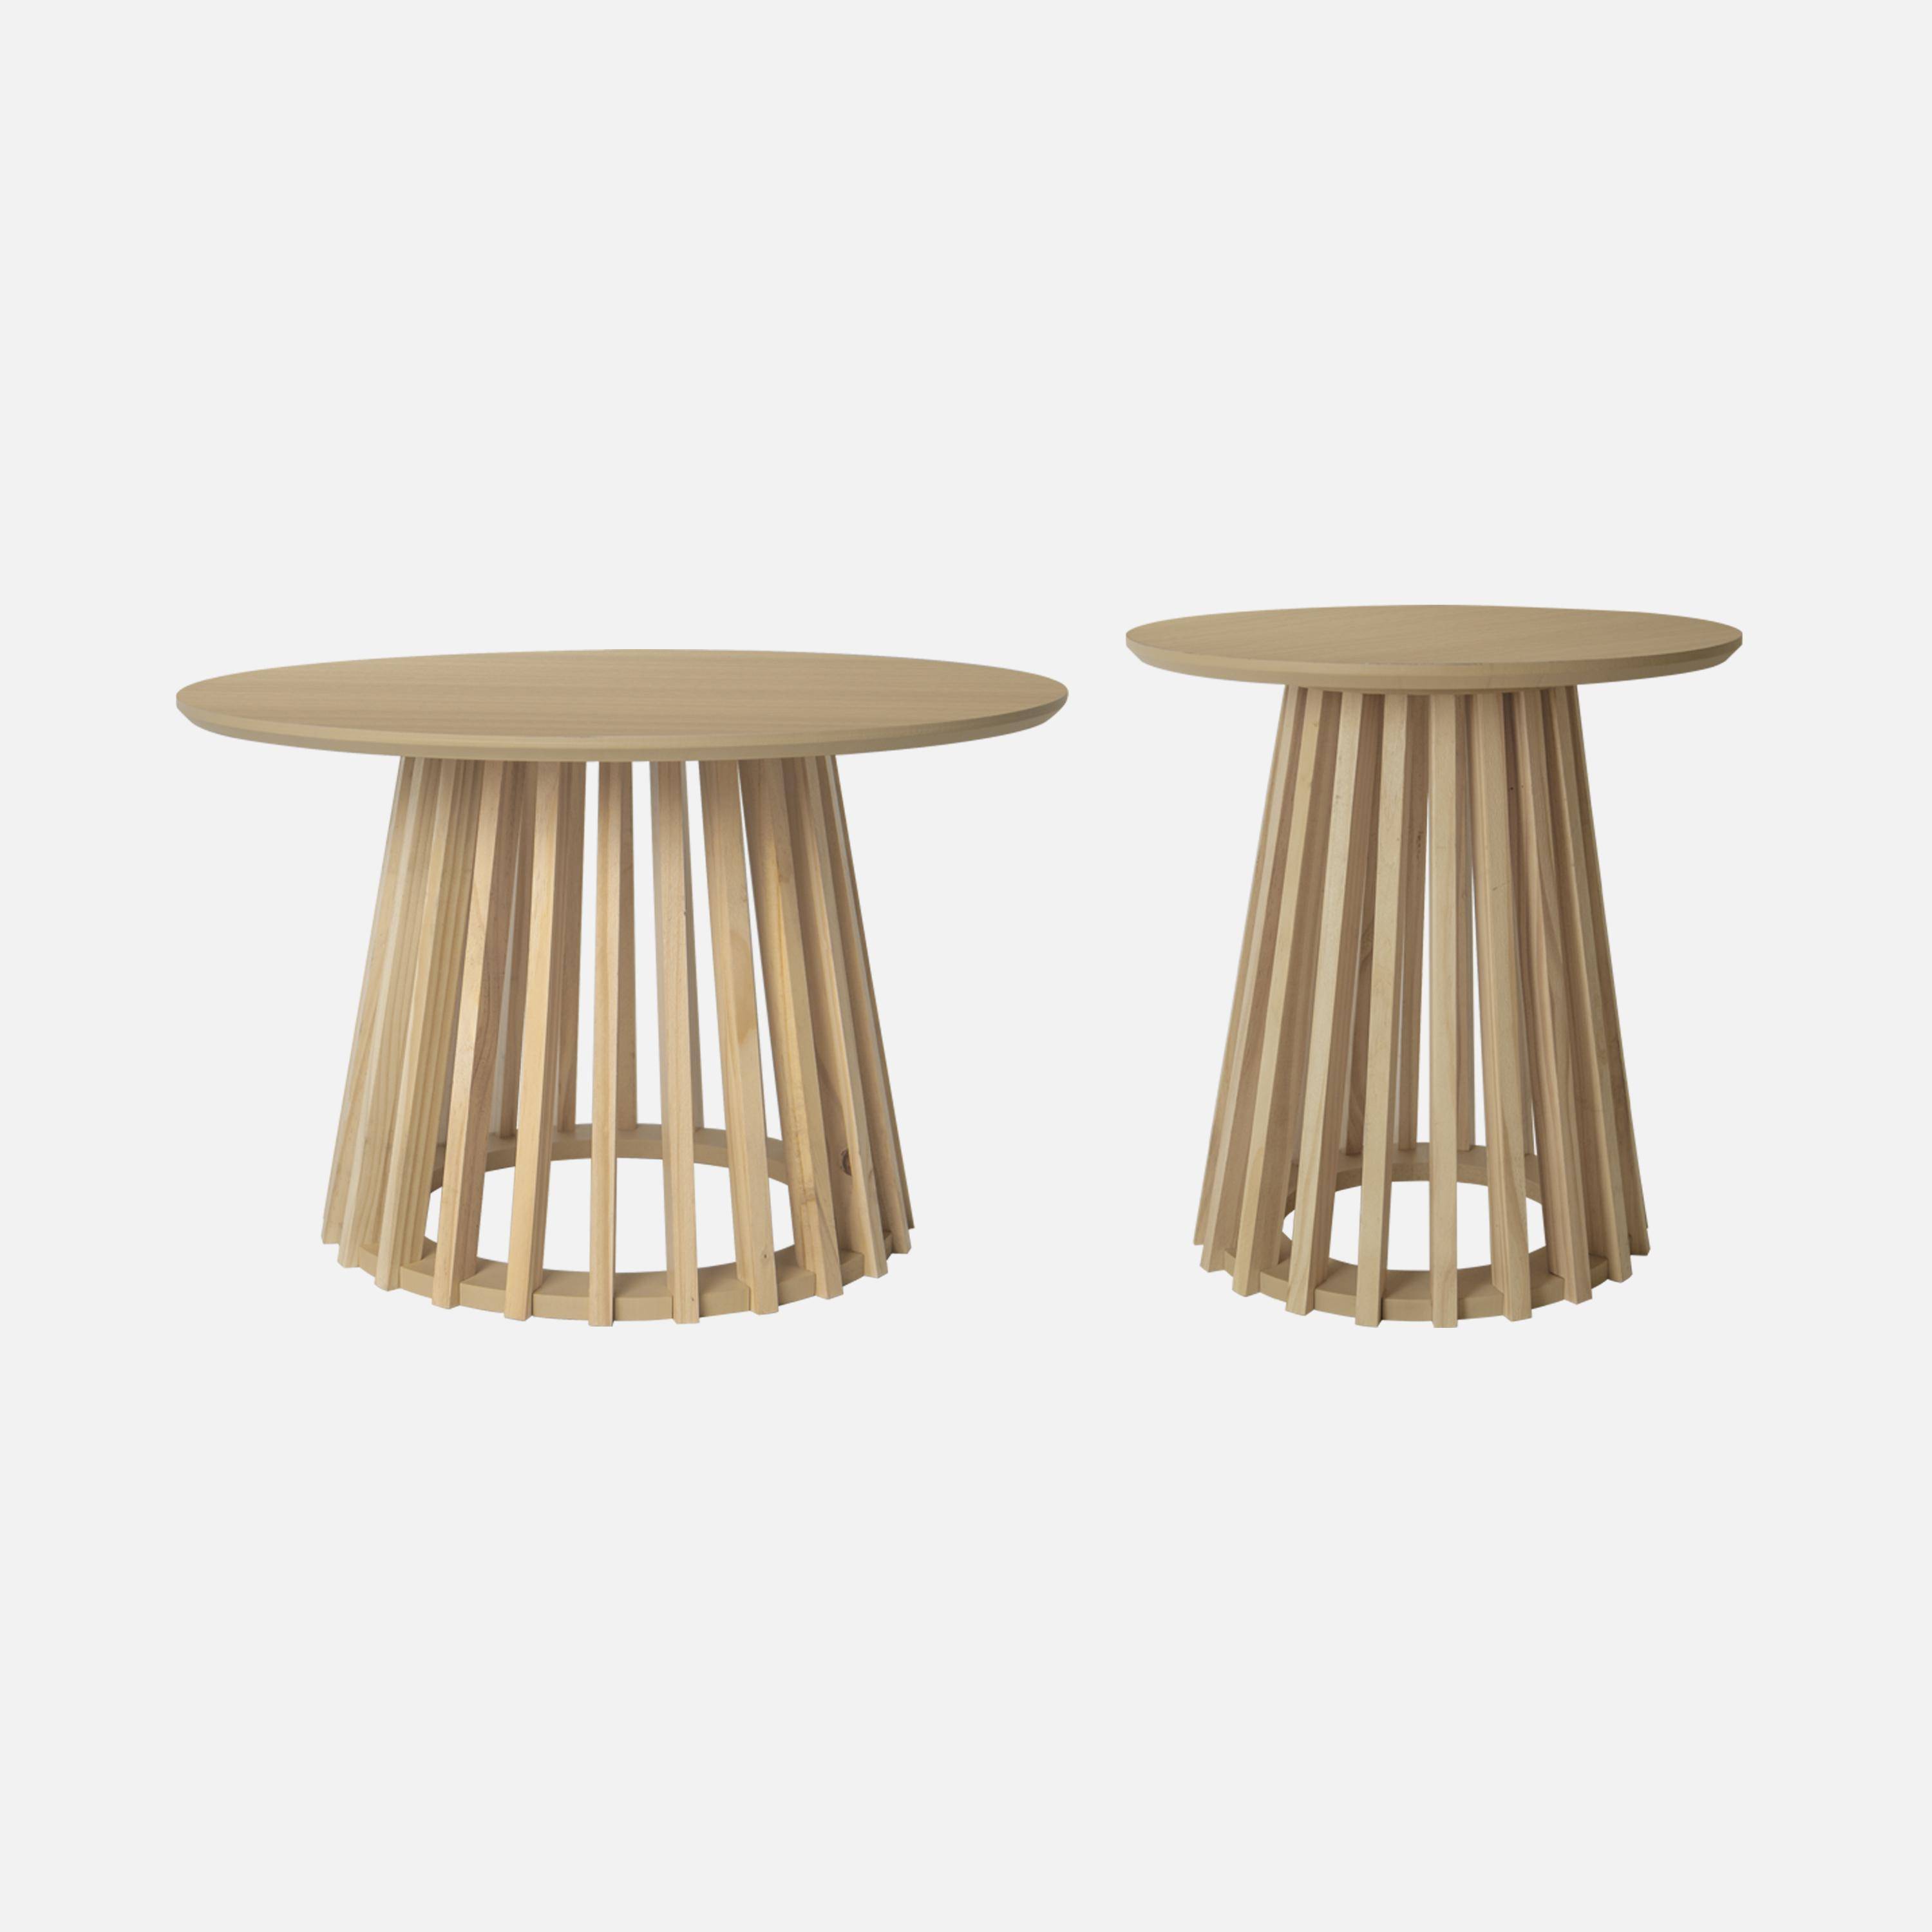 Set of 2 round coffee tables, oak-effect top and fir-wood legs, 40cm and 60cm,sweeek,Photo1